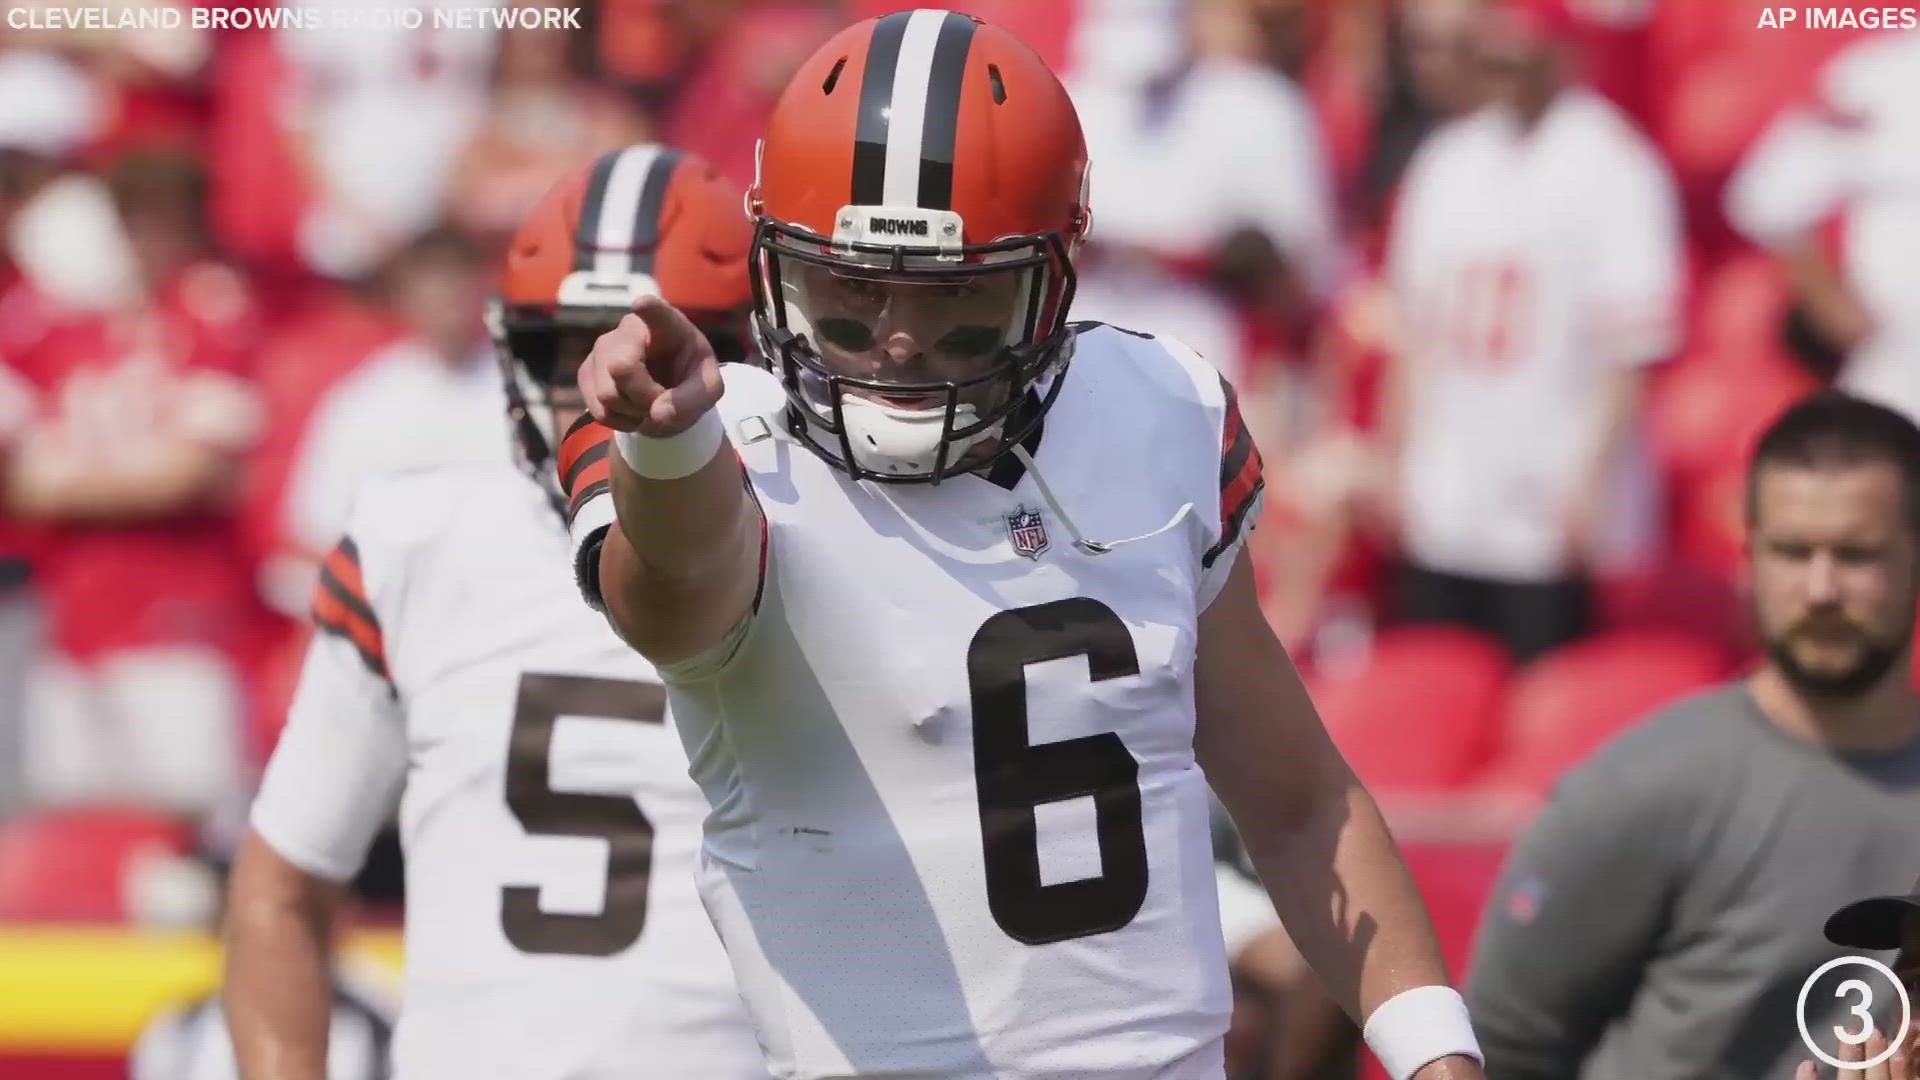 The Browns fell to the Kansas City Chiefs 33-29 in Sunday's 2021 NFL season opener. KC never led until the fourth quarter, but several mistakes doomed Cleveland.